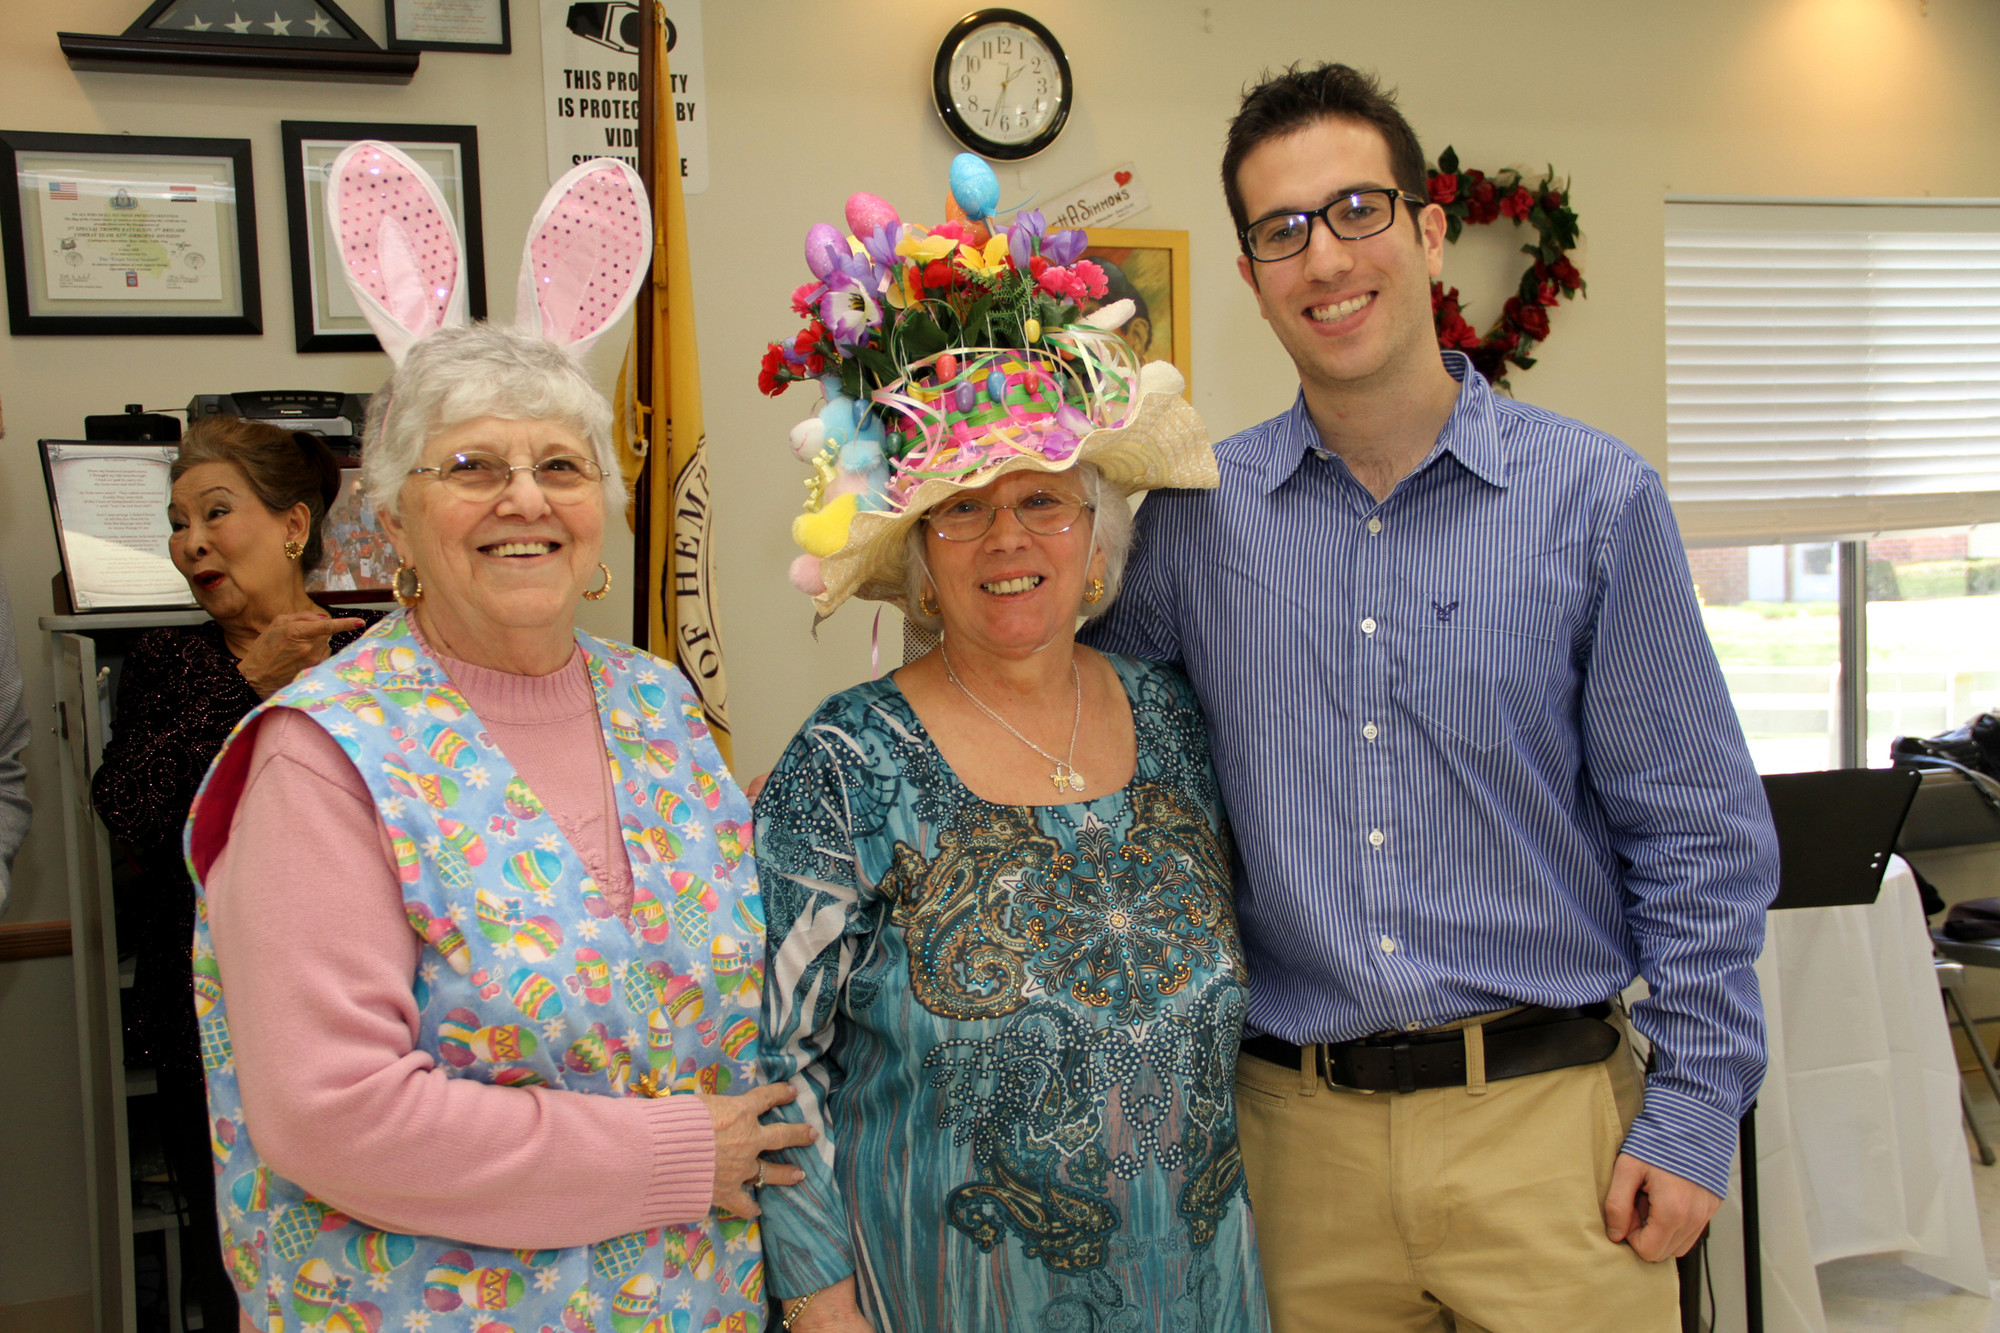 President Phyllis Caggiano, left, with bonnet competition winner Maria Scifo and East Meadow Herald editor David Weingrad, who served as judge.